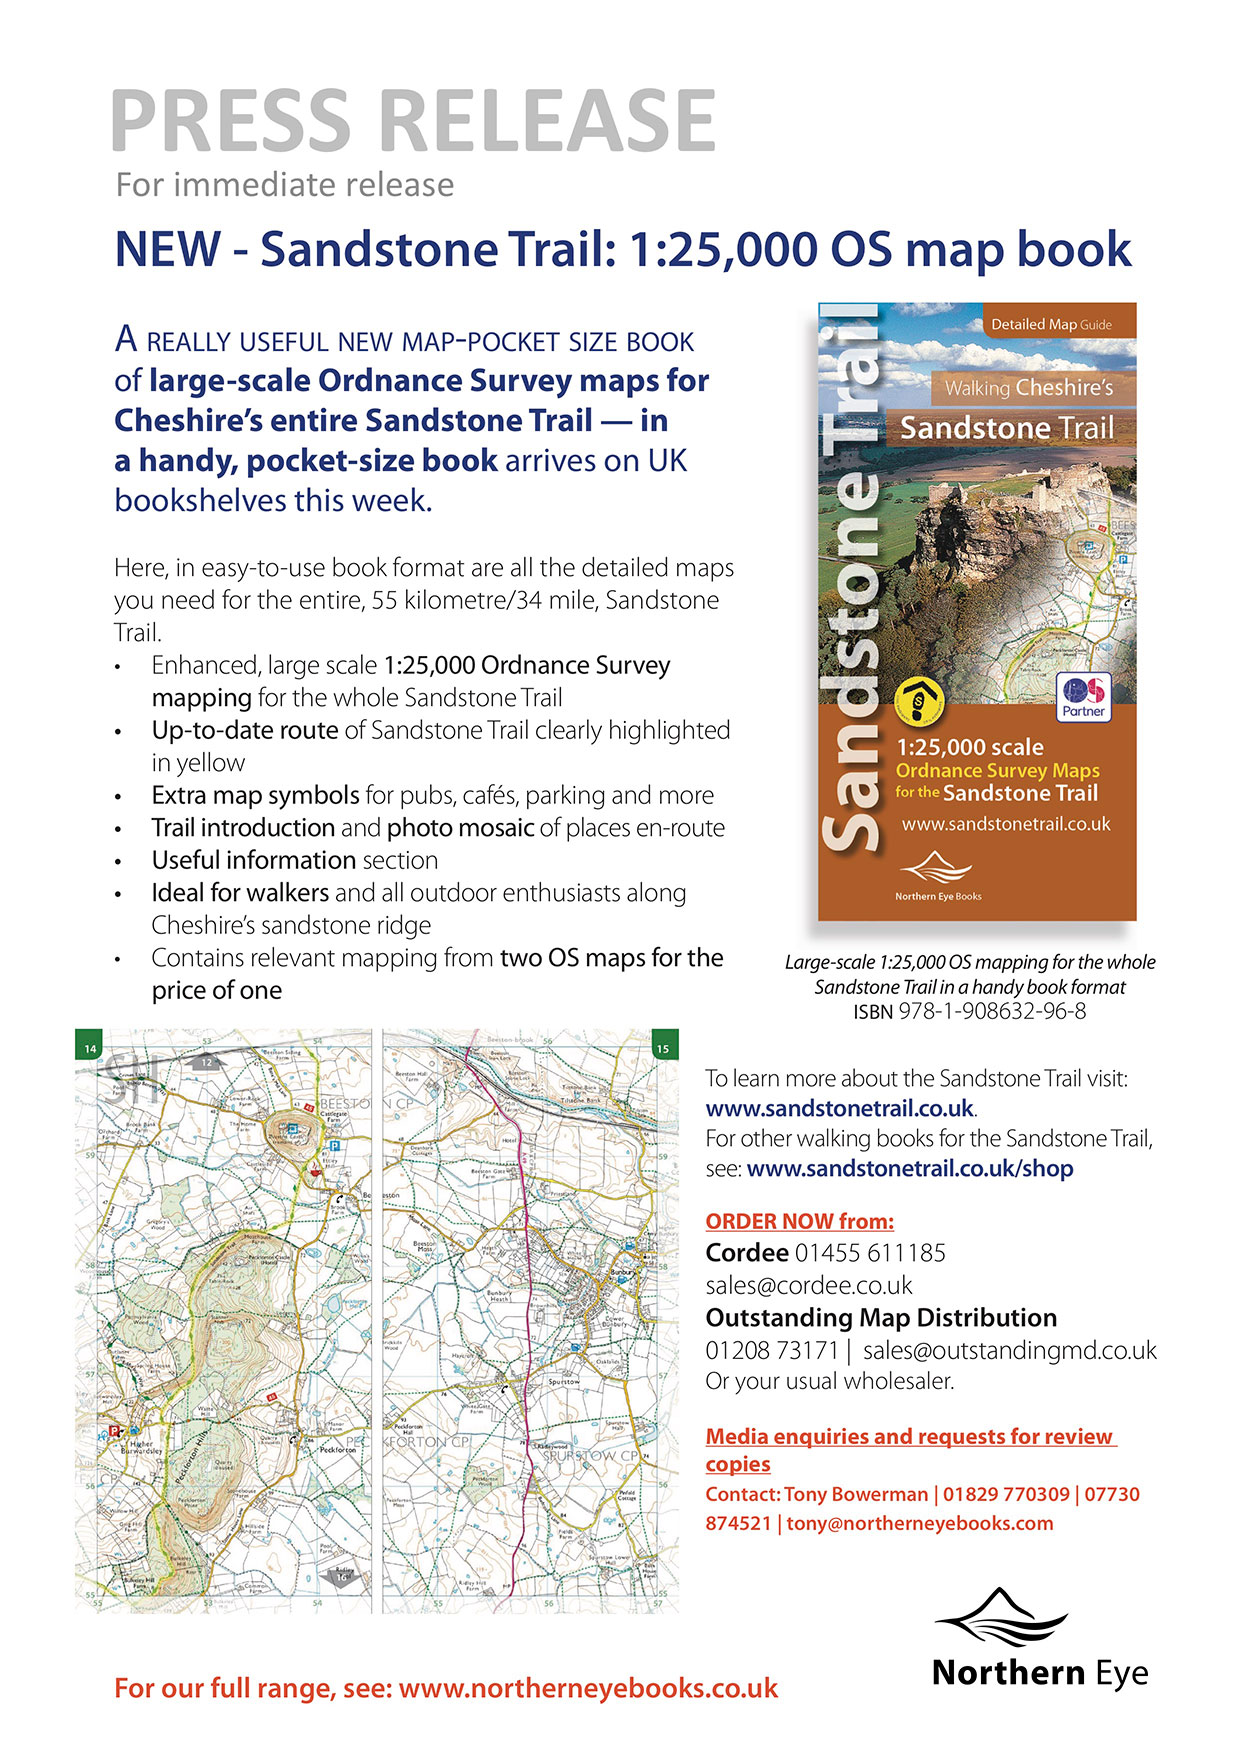 Sandstone Trail large scale OS map book/atlas. Mapping for try whole 34 mile/55km trail.